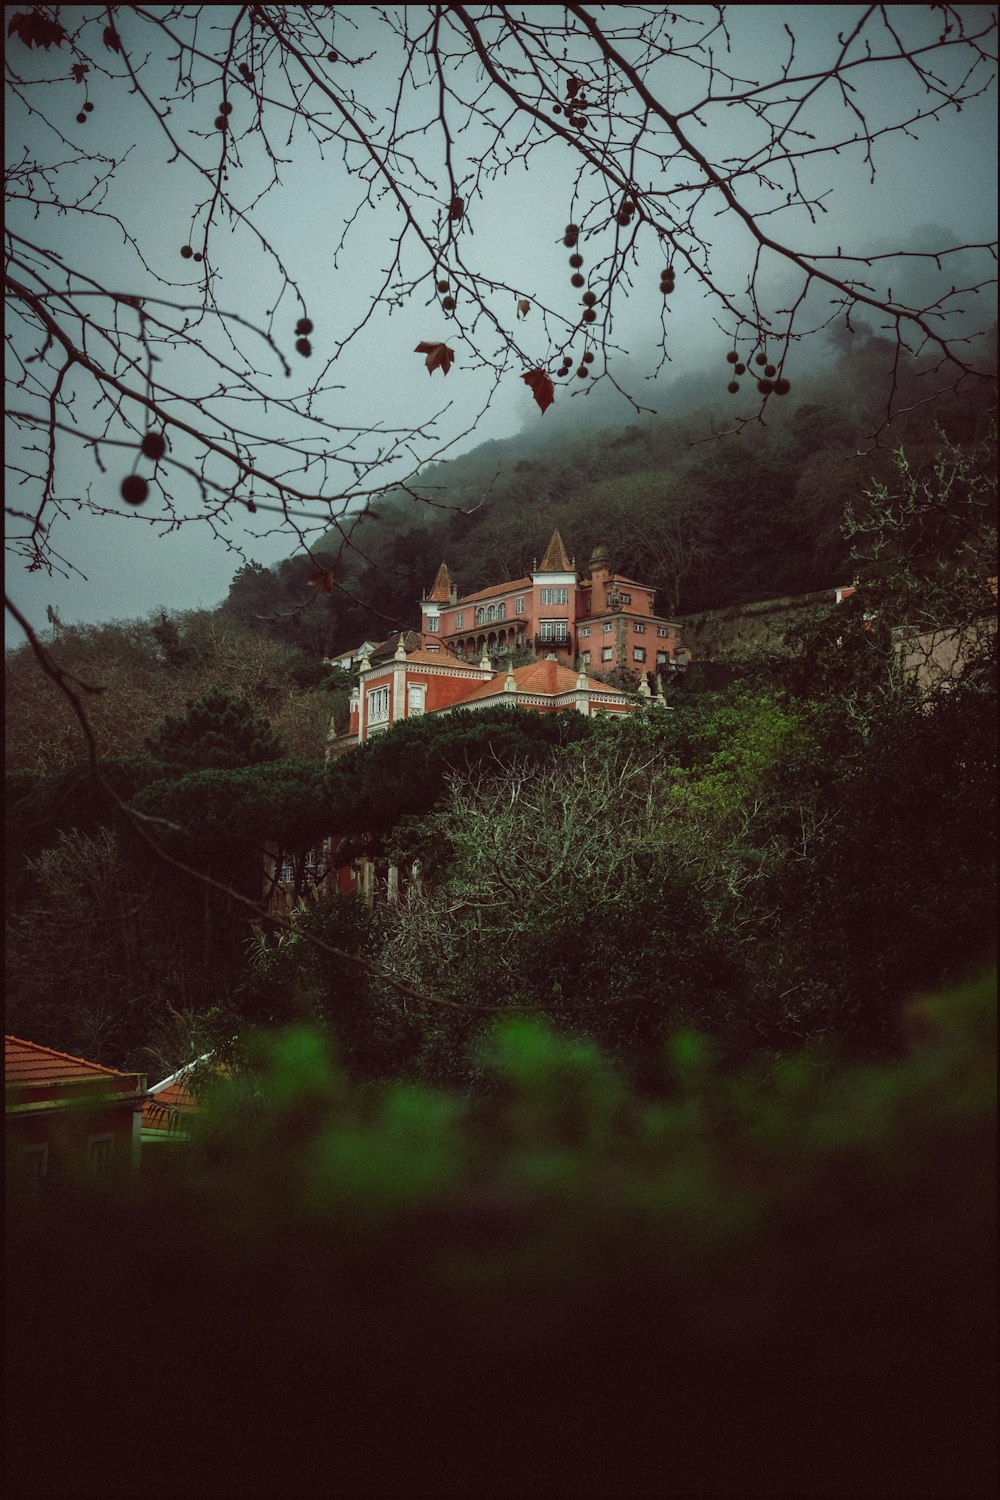 a large house sitting on top of a lush green hillside